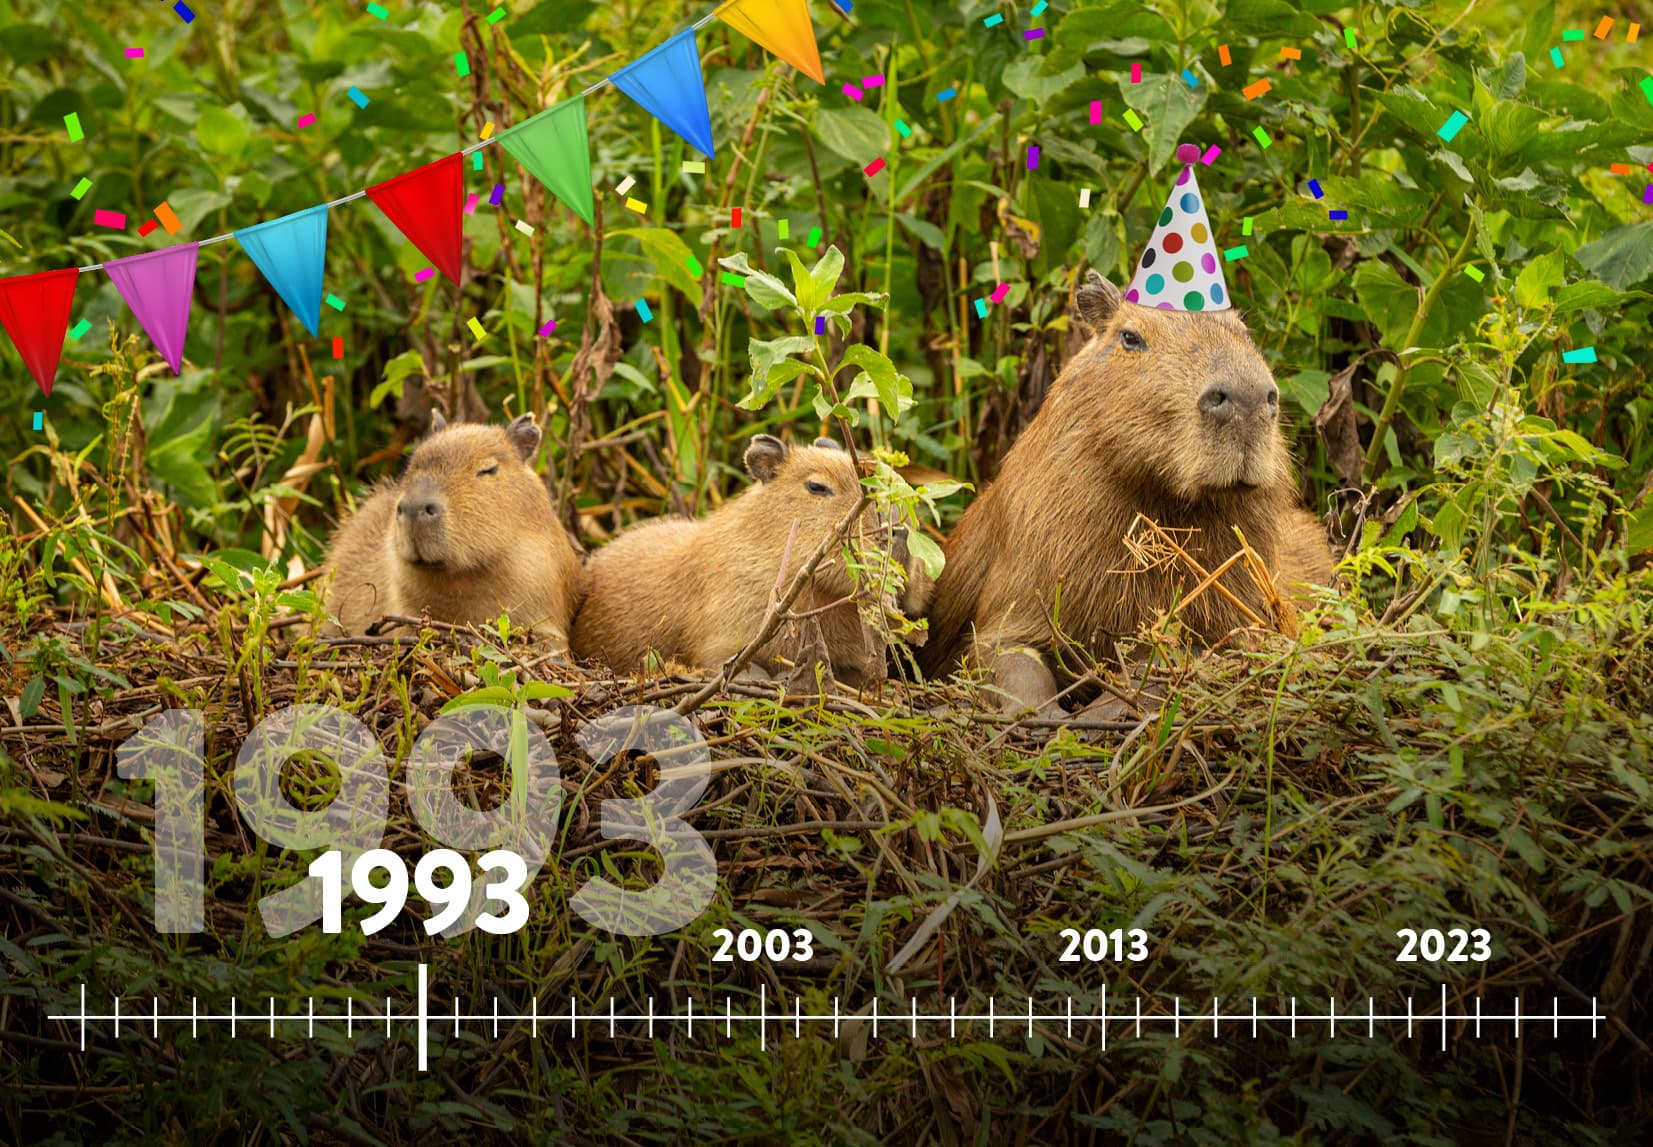 A timeline from 1993 to the future with several Capybaras in the background.